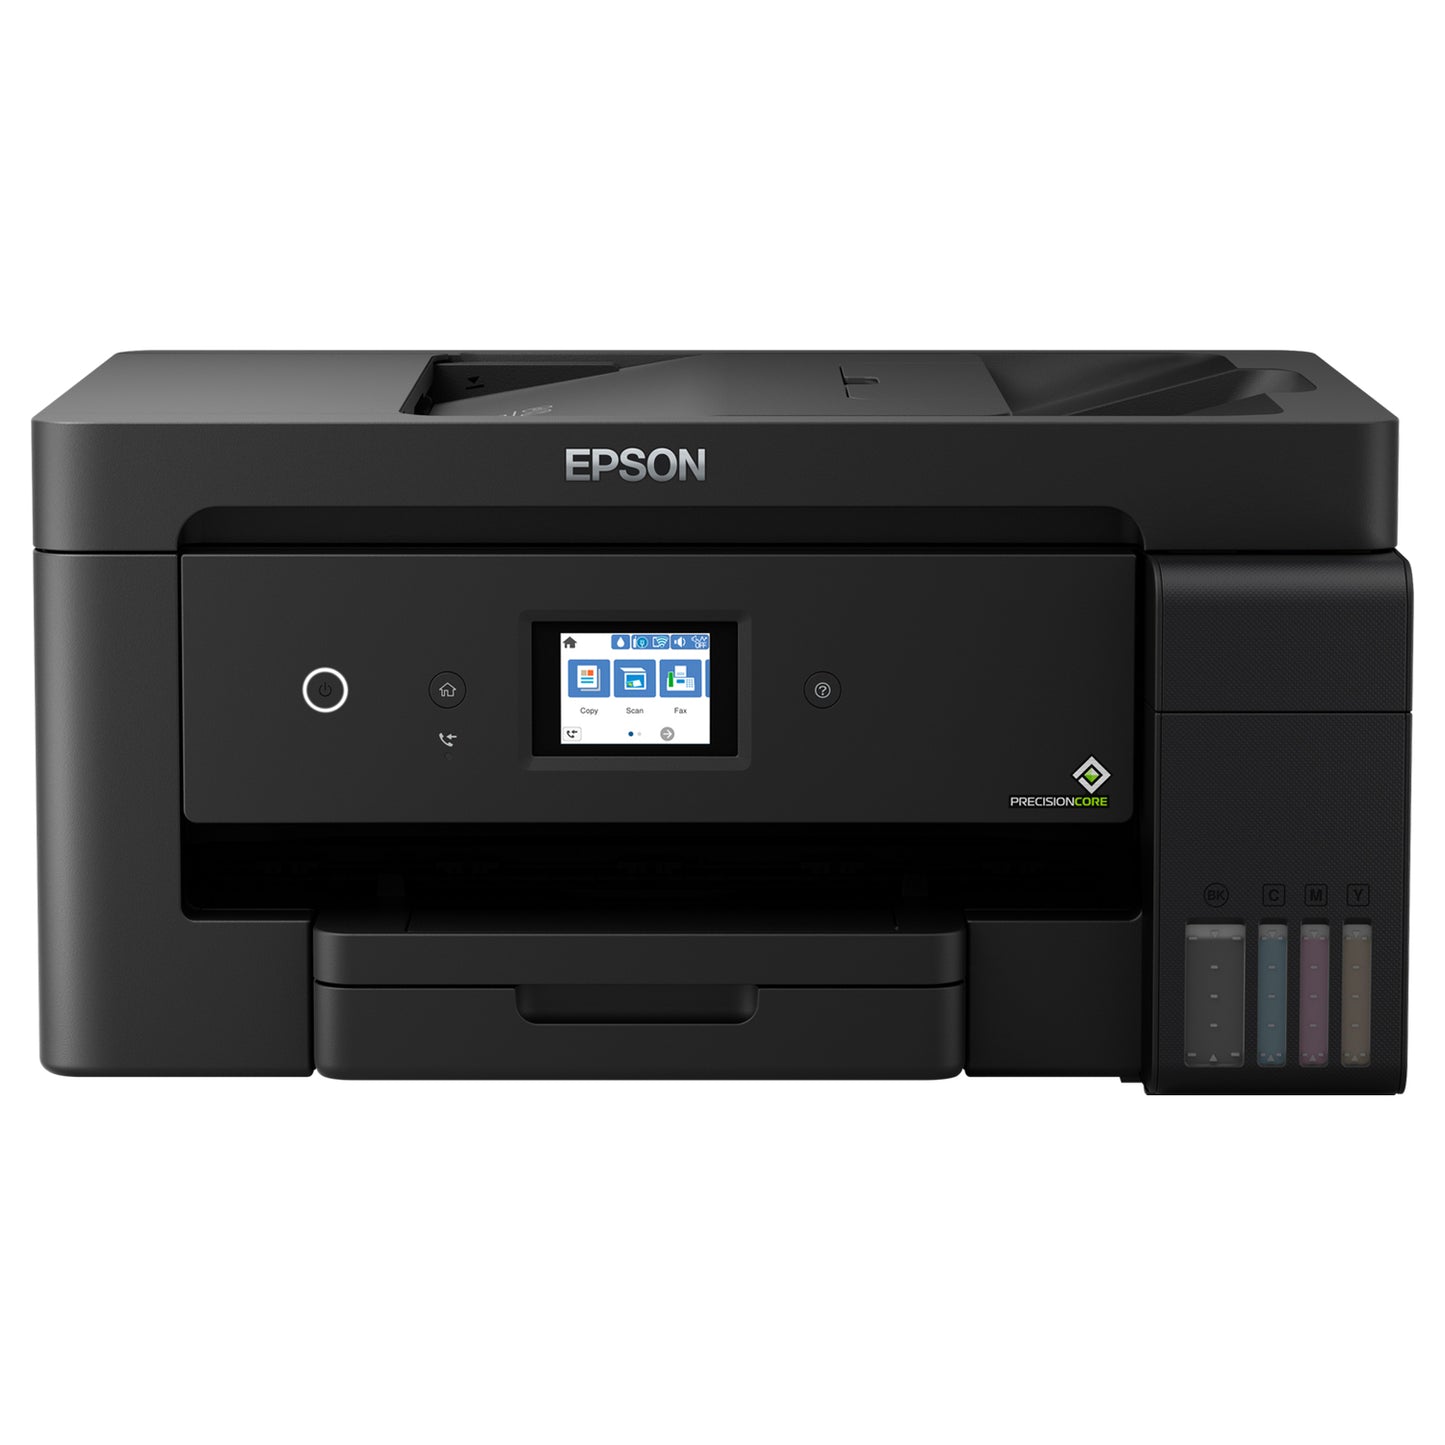 Epson EcoTank L14150 A3+ Auto Duplex All-in-One Refillable Ink Tank Borderless Colored Inkjet Printer with Print, Scan, Copy, and Fax Function with USB 2.0, Wi-Fi / Wi-Fi Direct, and Ethernet Connection for Home and Commercial Use